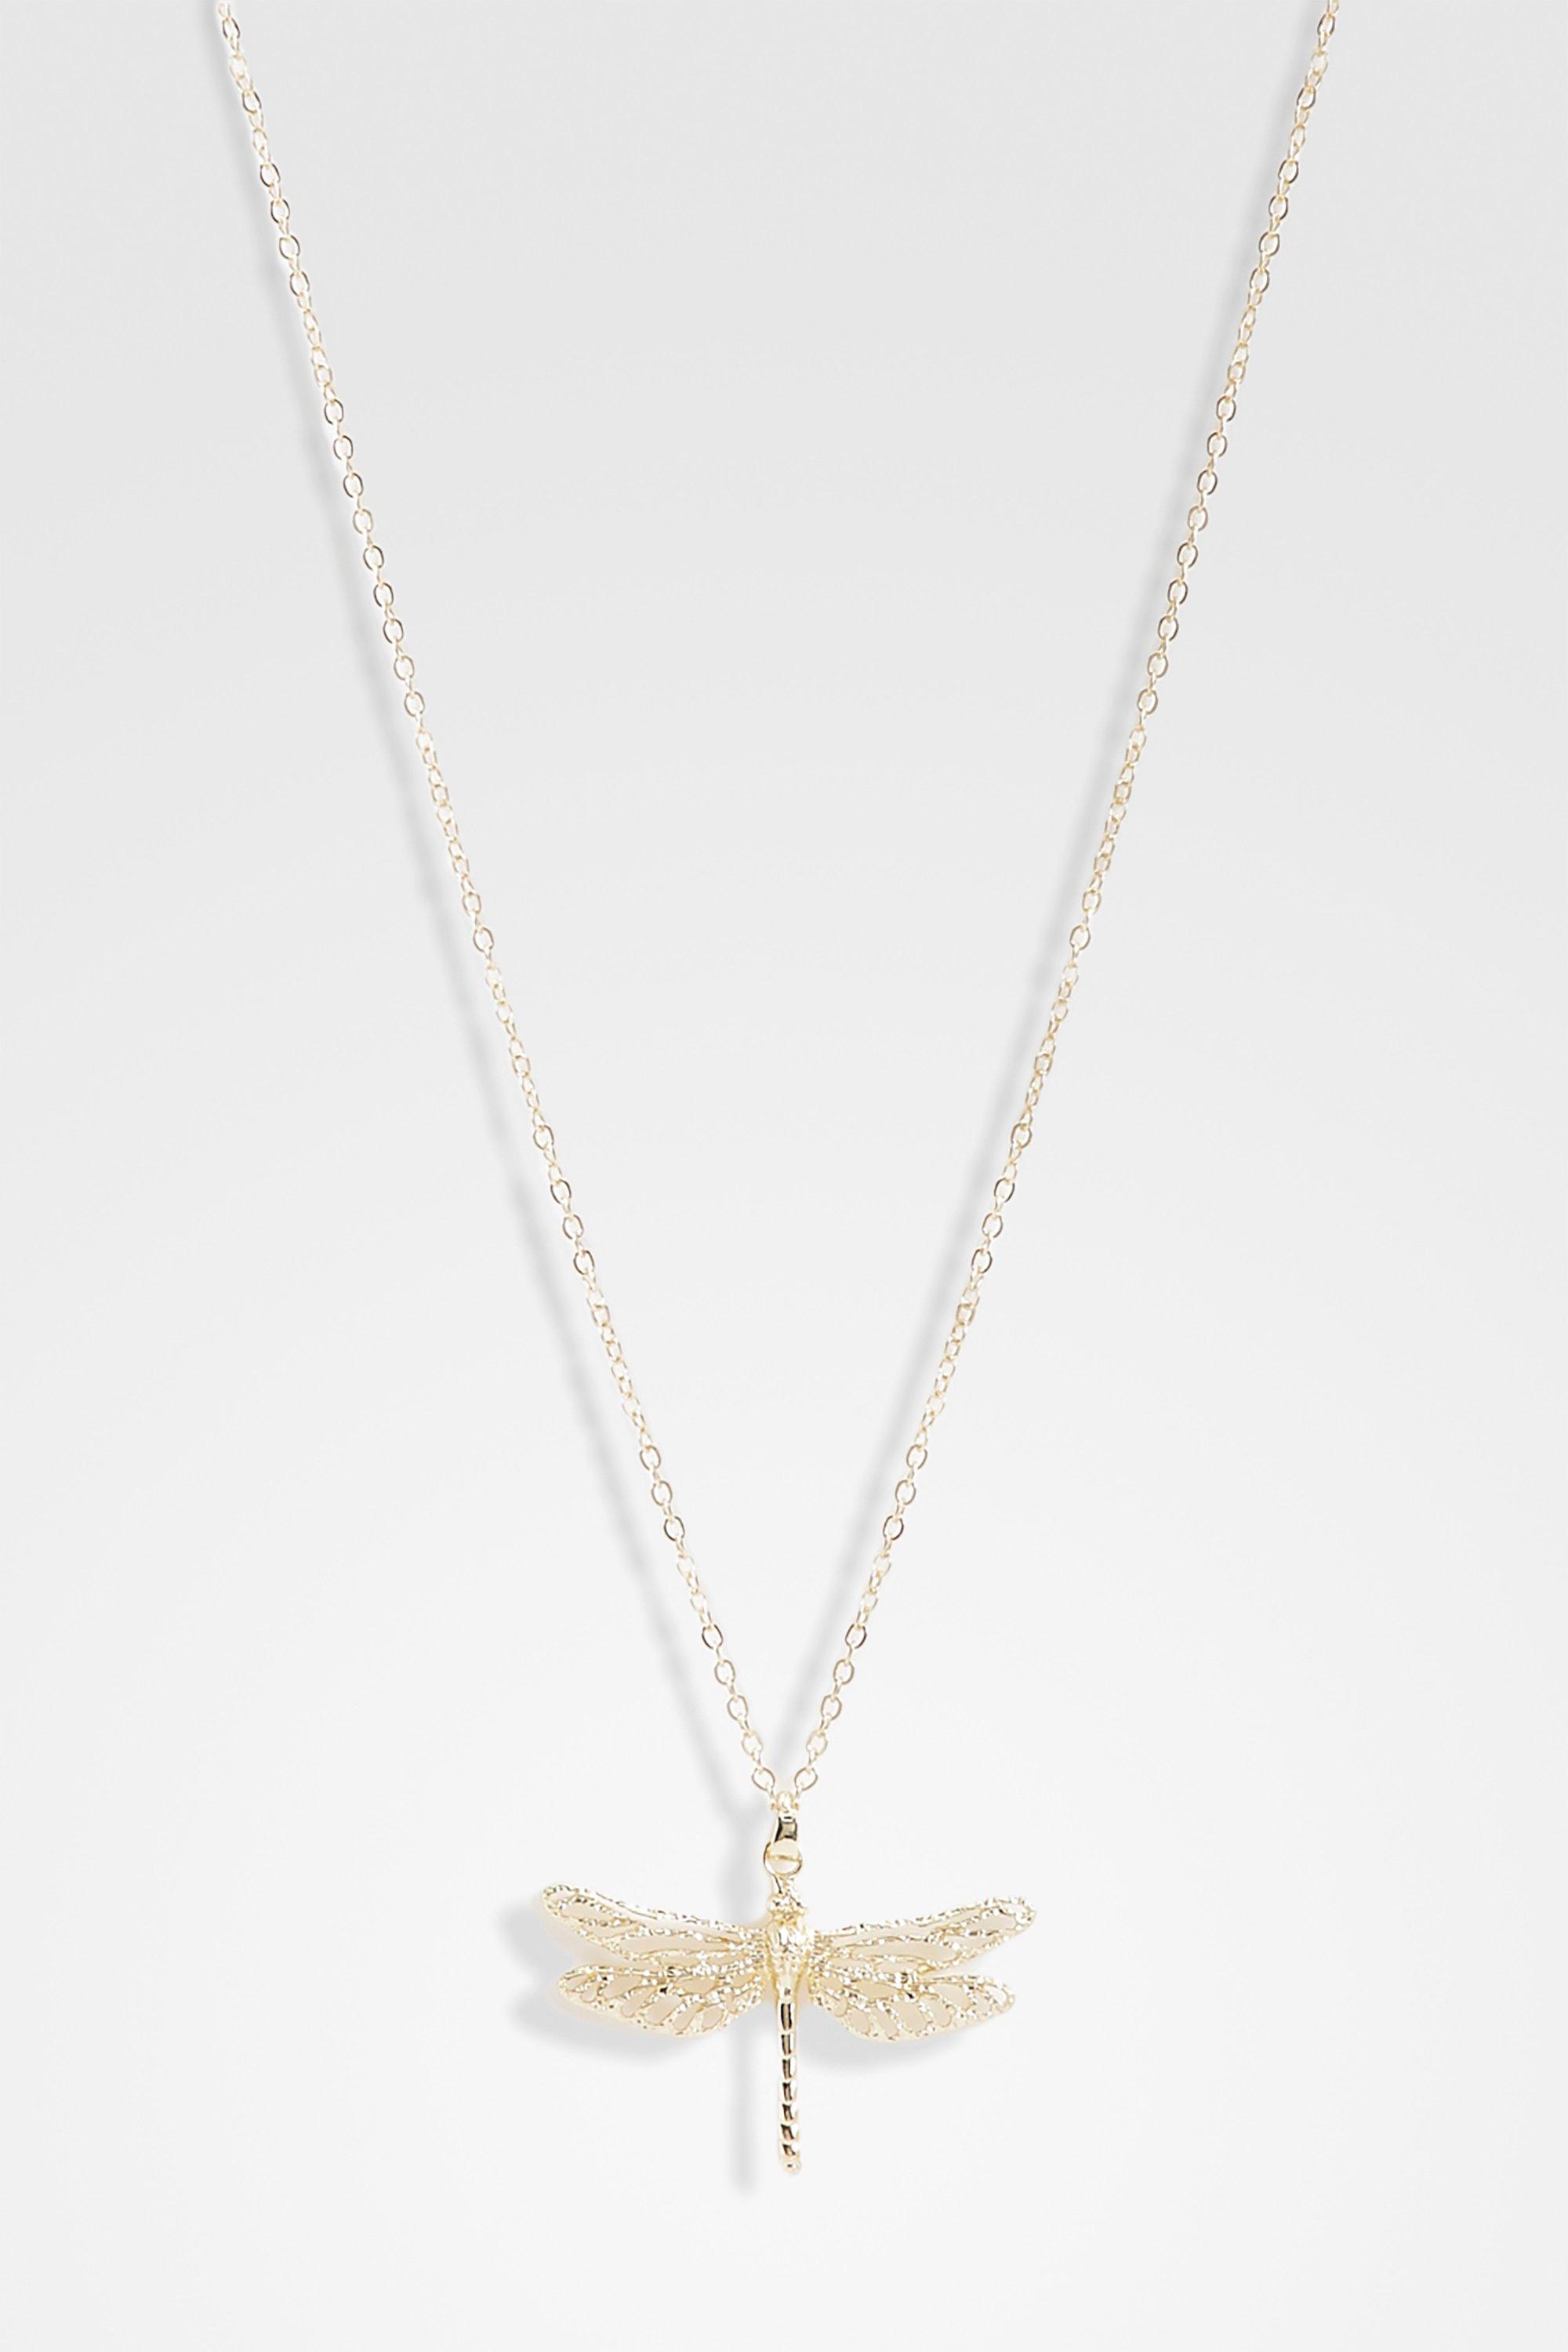 Image of Gold Dragonfly Necklace, Metallics